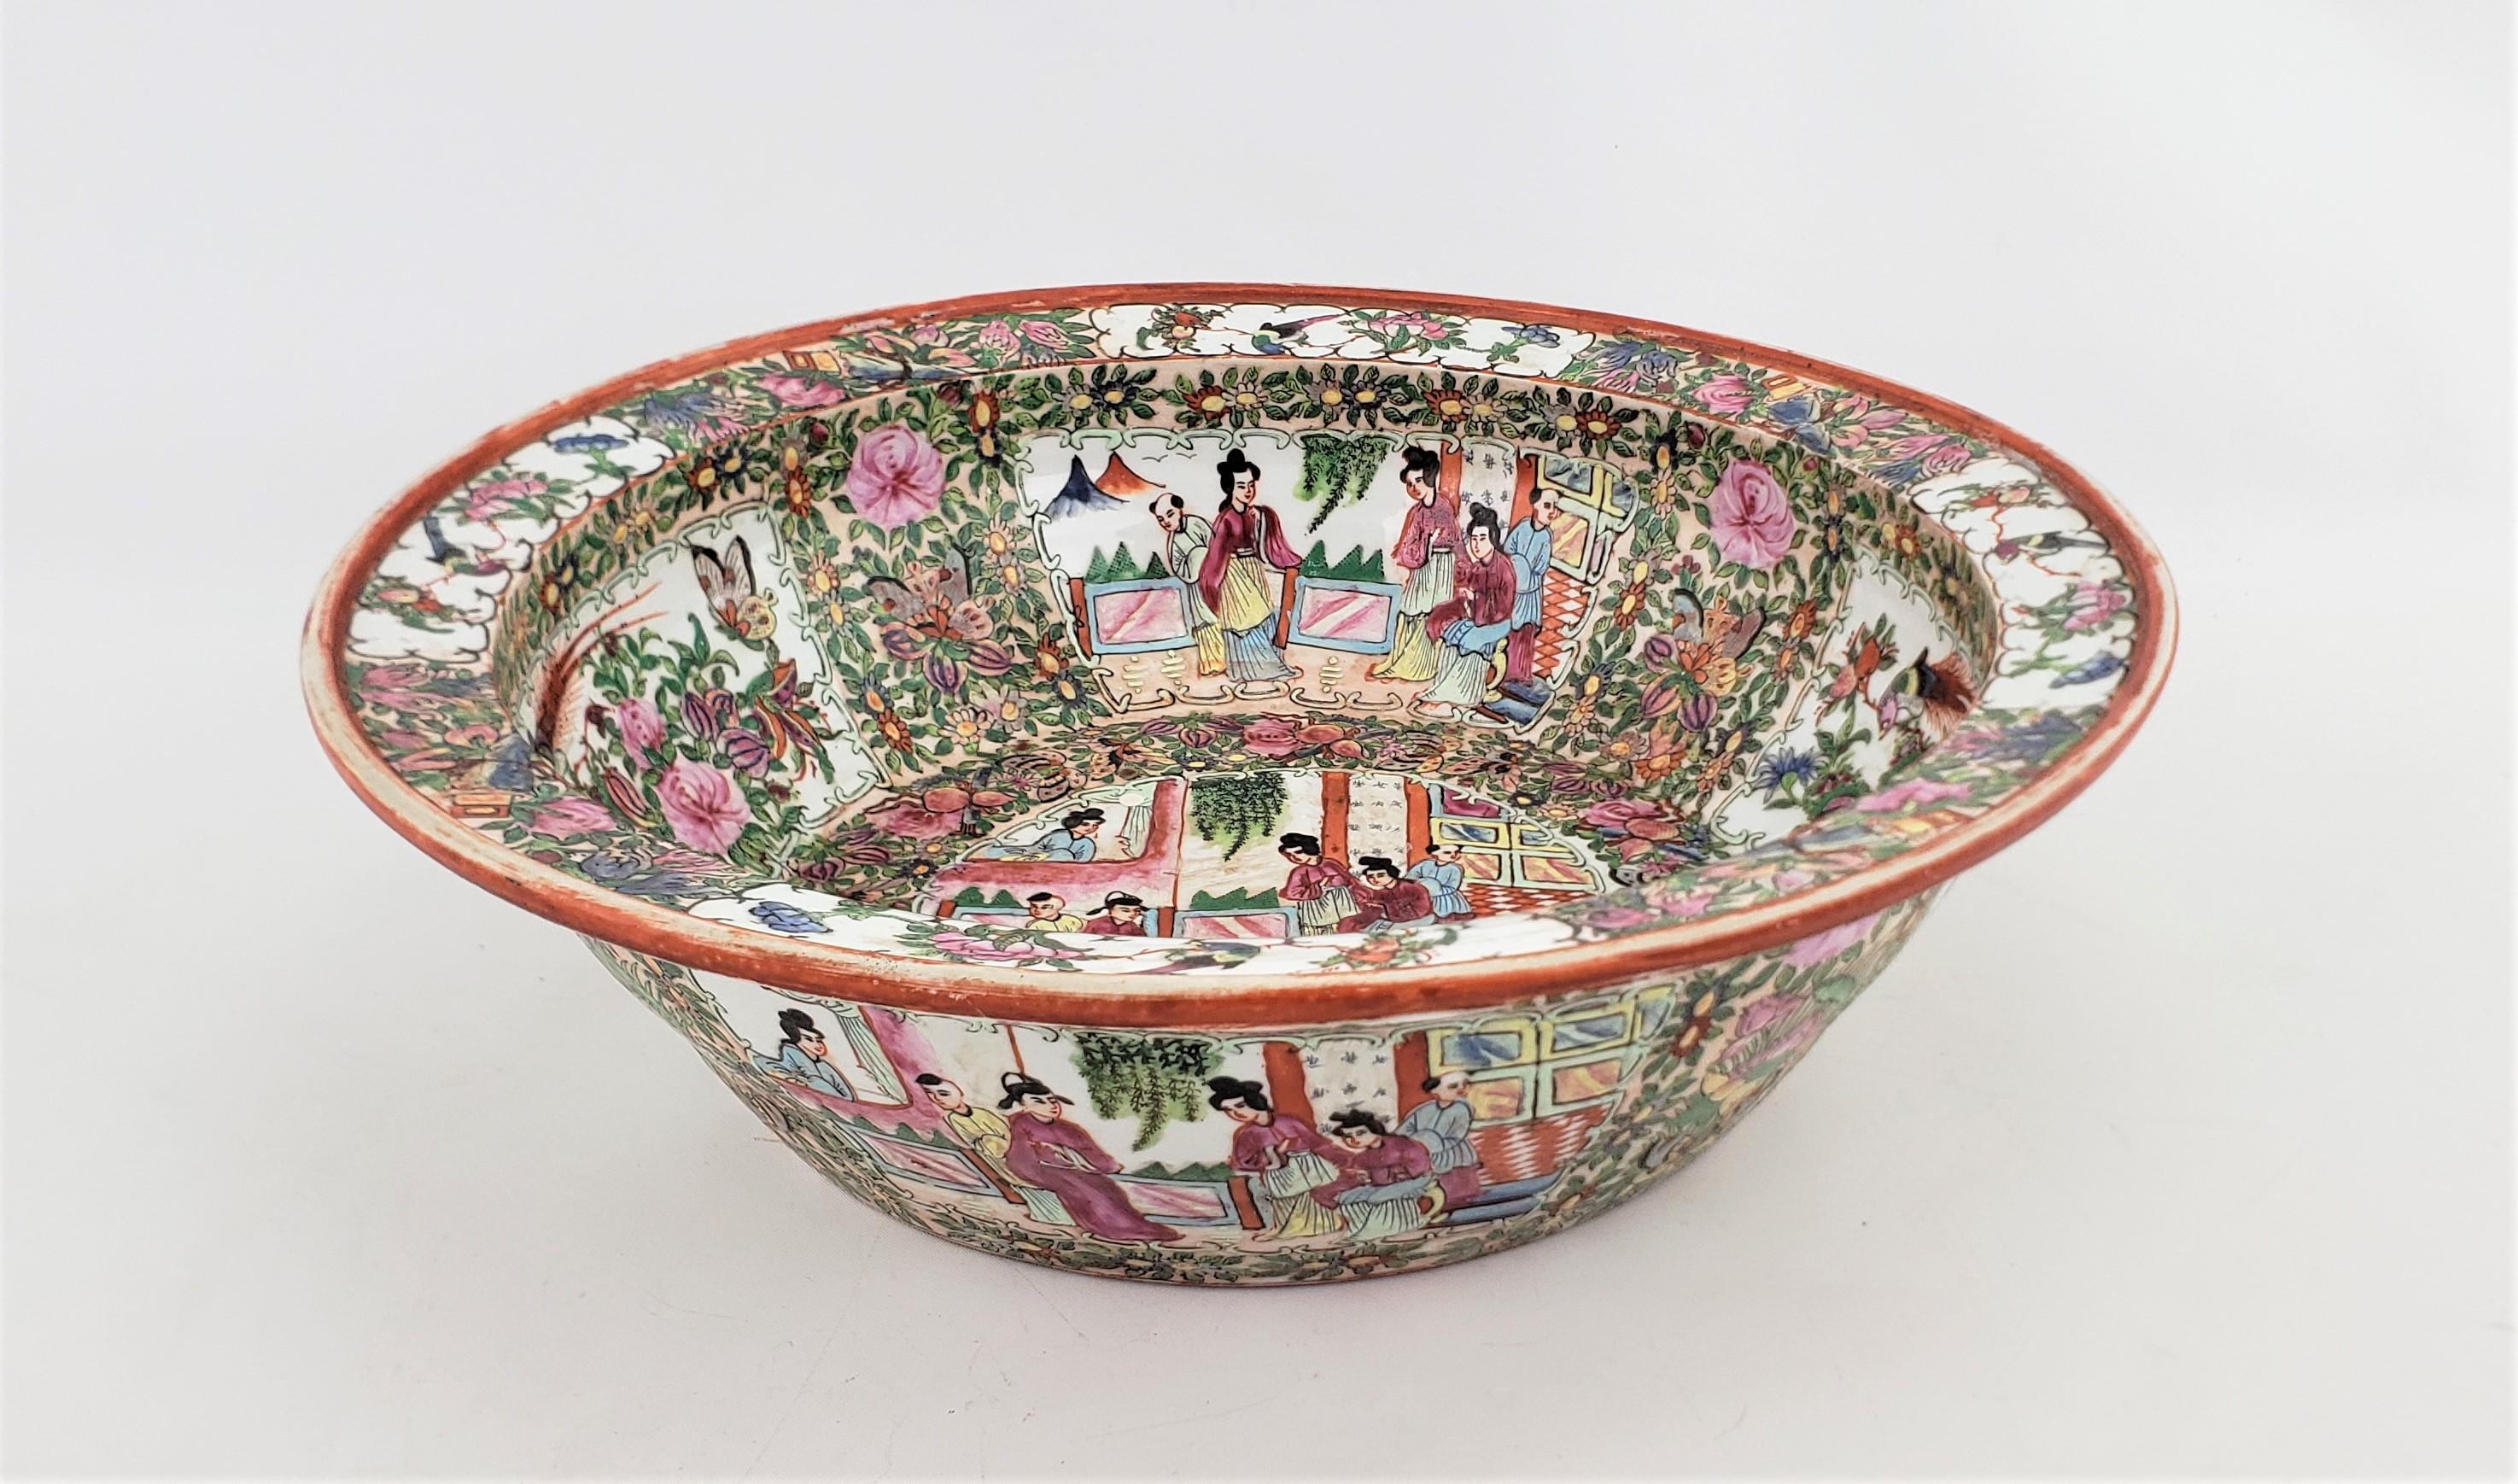 This very large and substantial bowl or basin is signed by and unknown artist and originates from China, dating to approximately 1920 and done in the period Chinese Export style. The entire bowl is very ornately hand-painted in vibrant colors in the